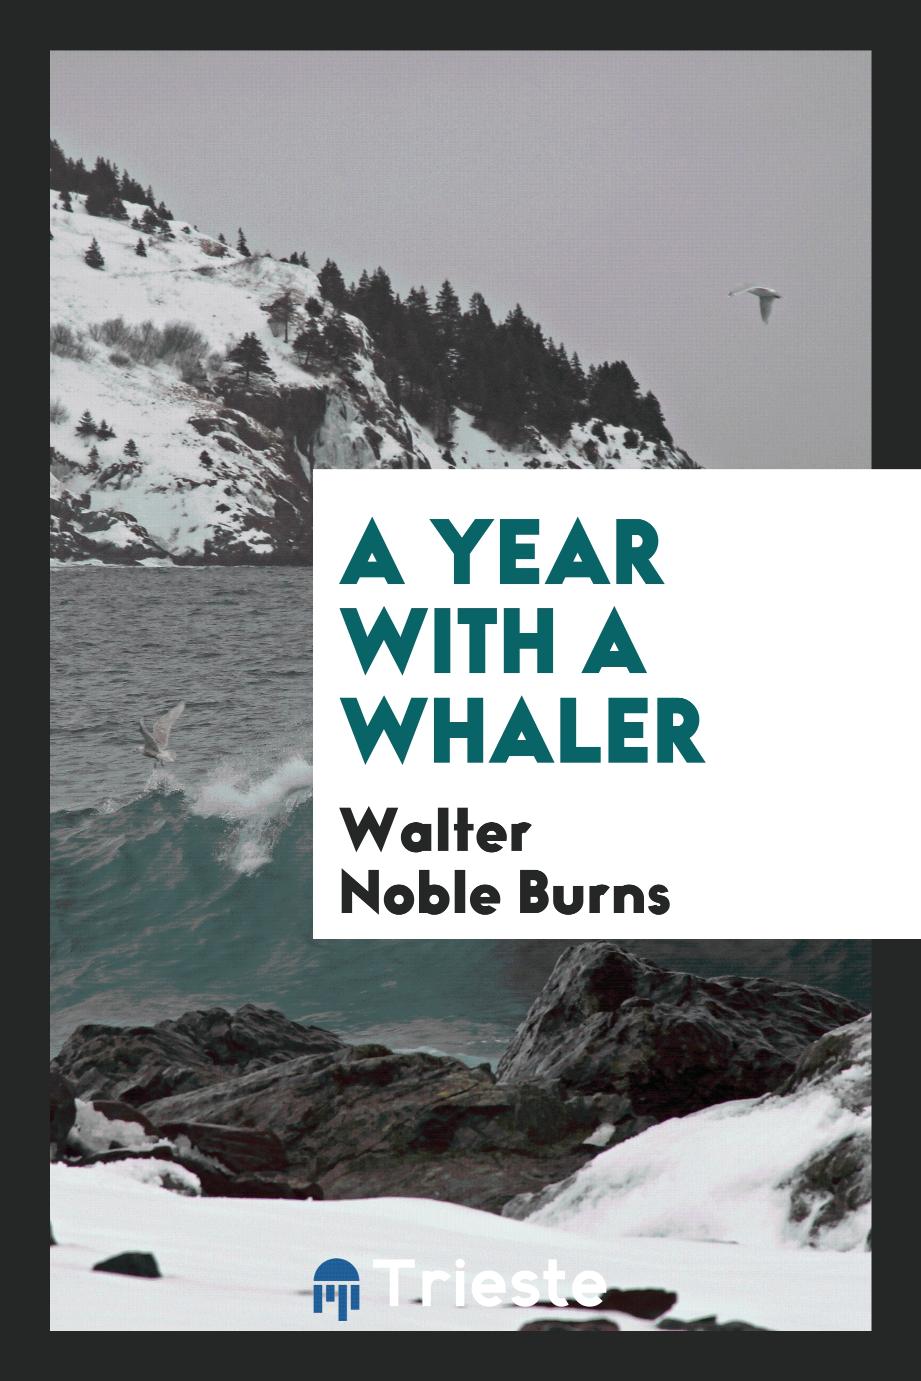 A year with a whaler